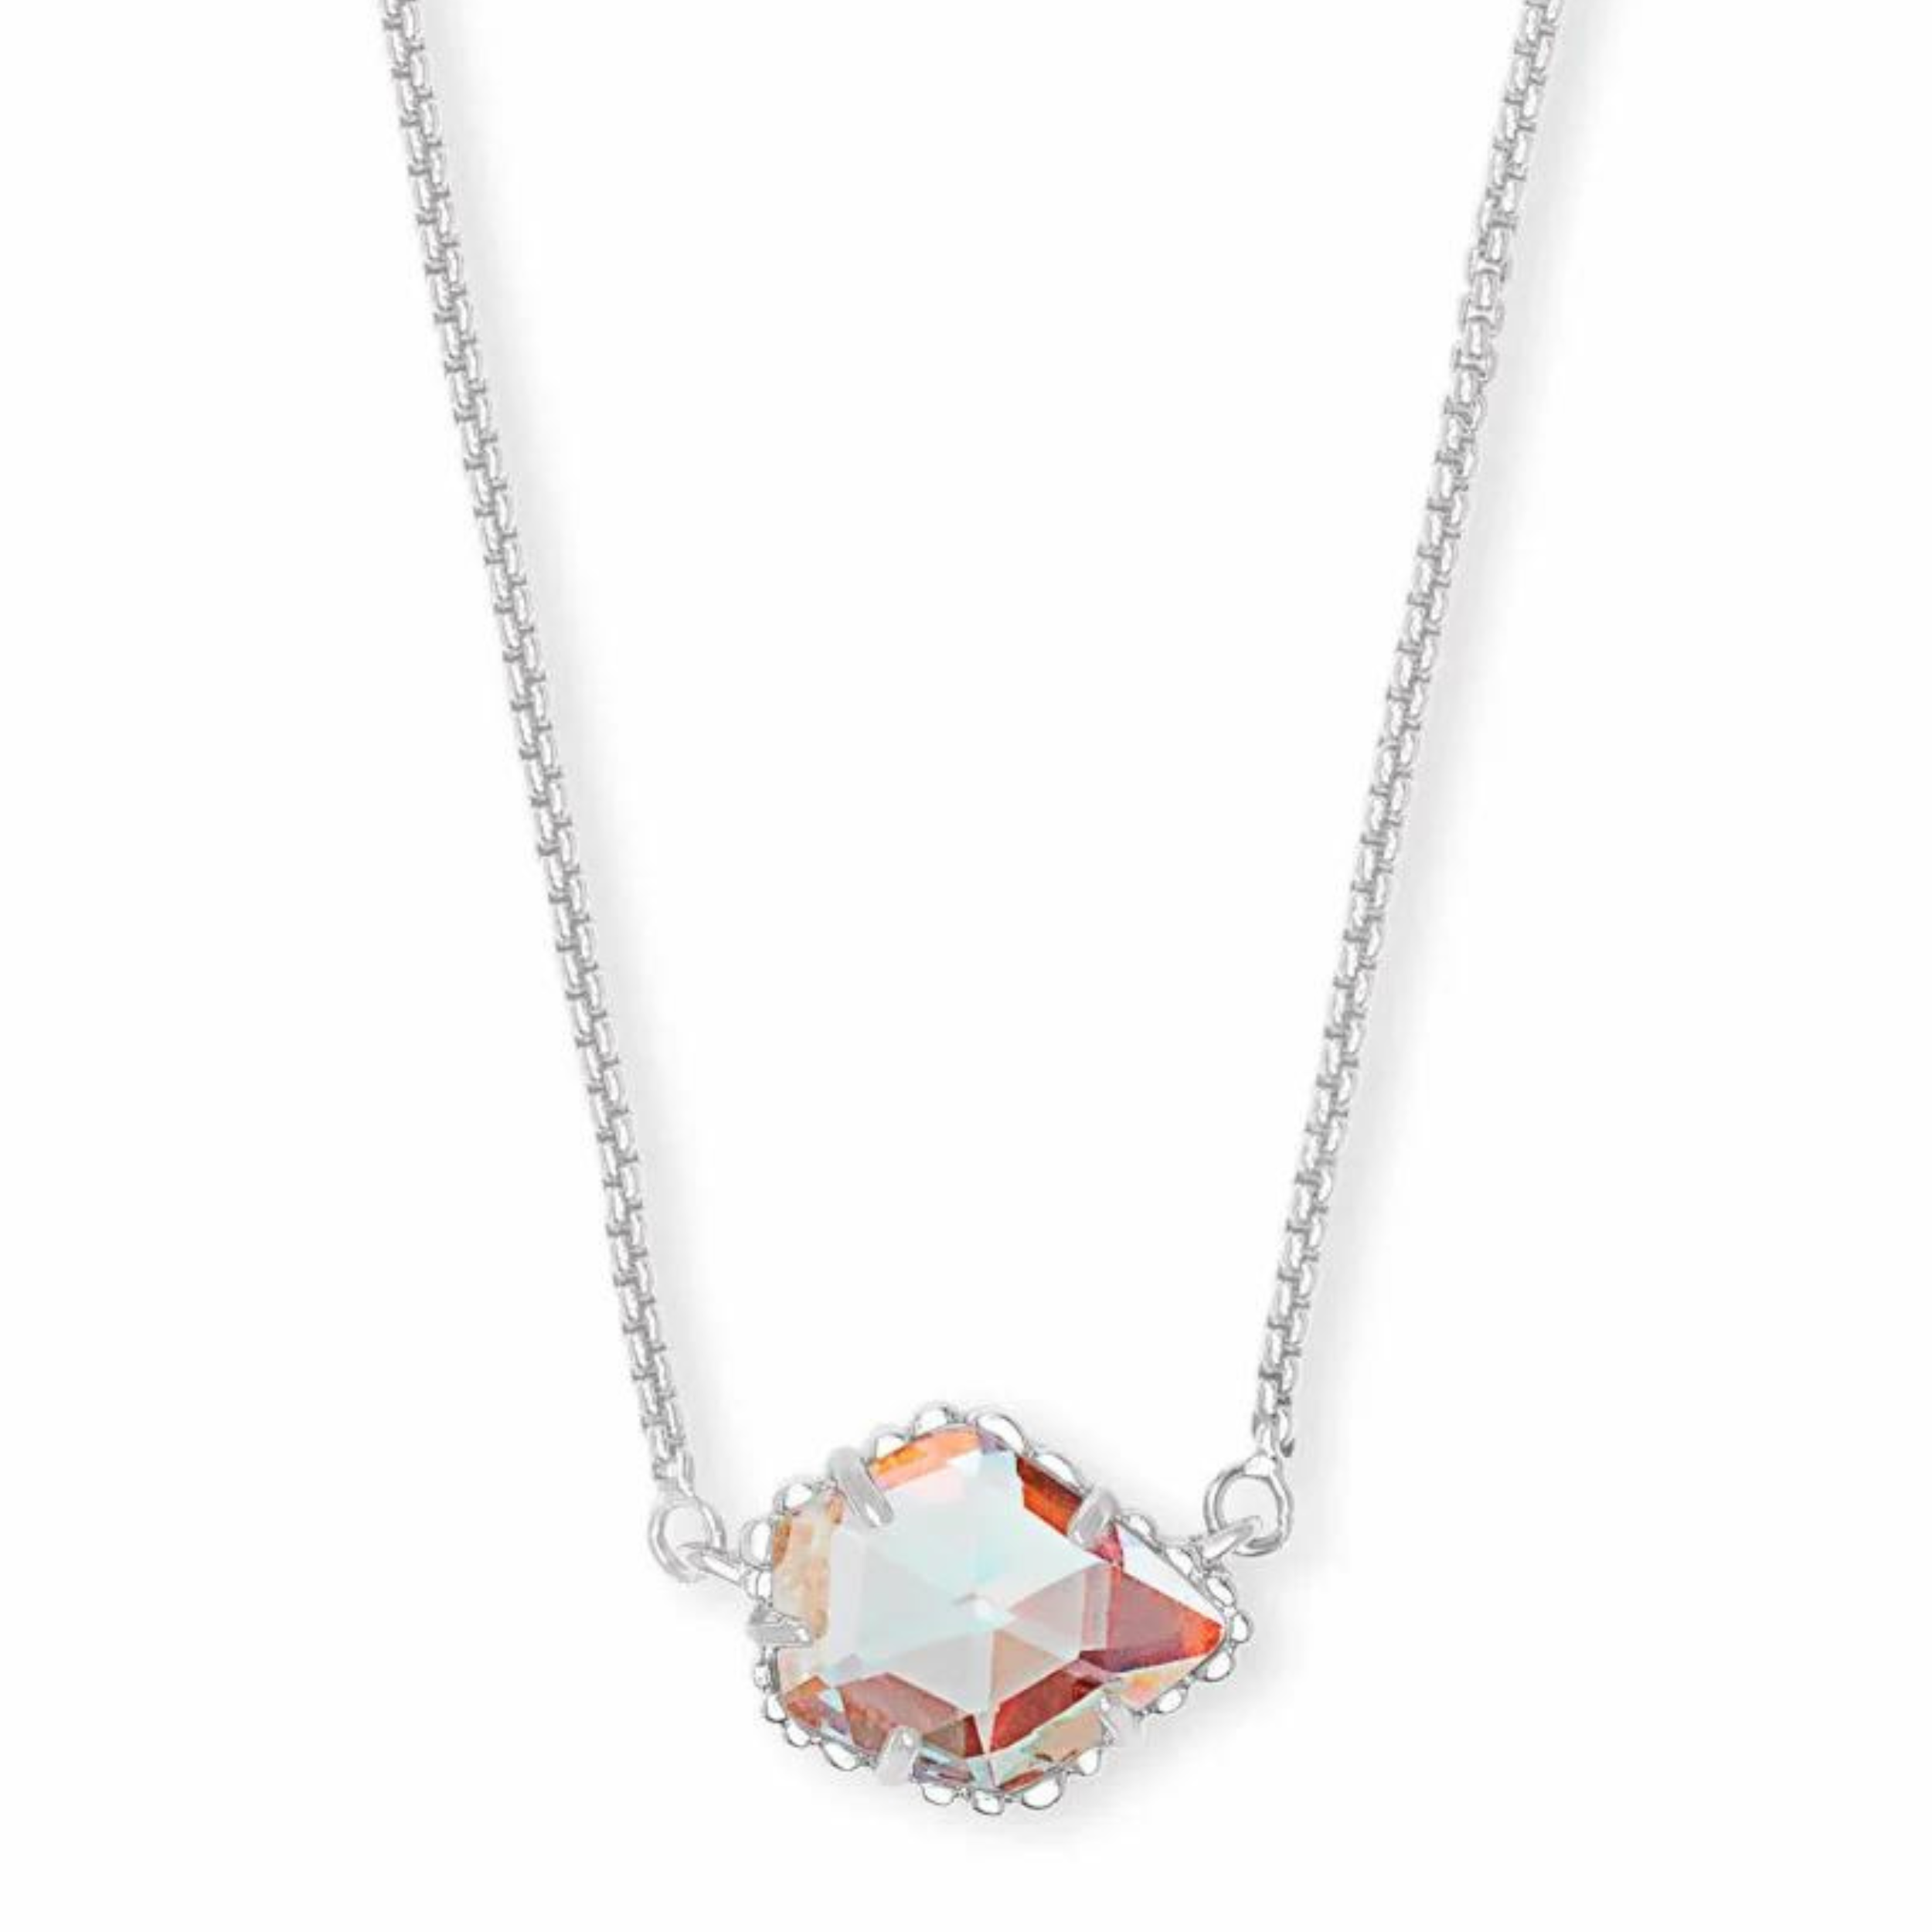 Silver necklace with dichroic glass pendant, pictured on a white background.